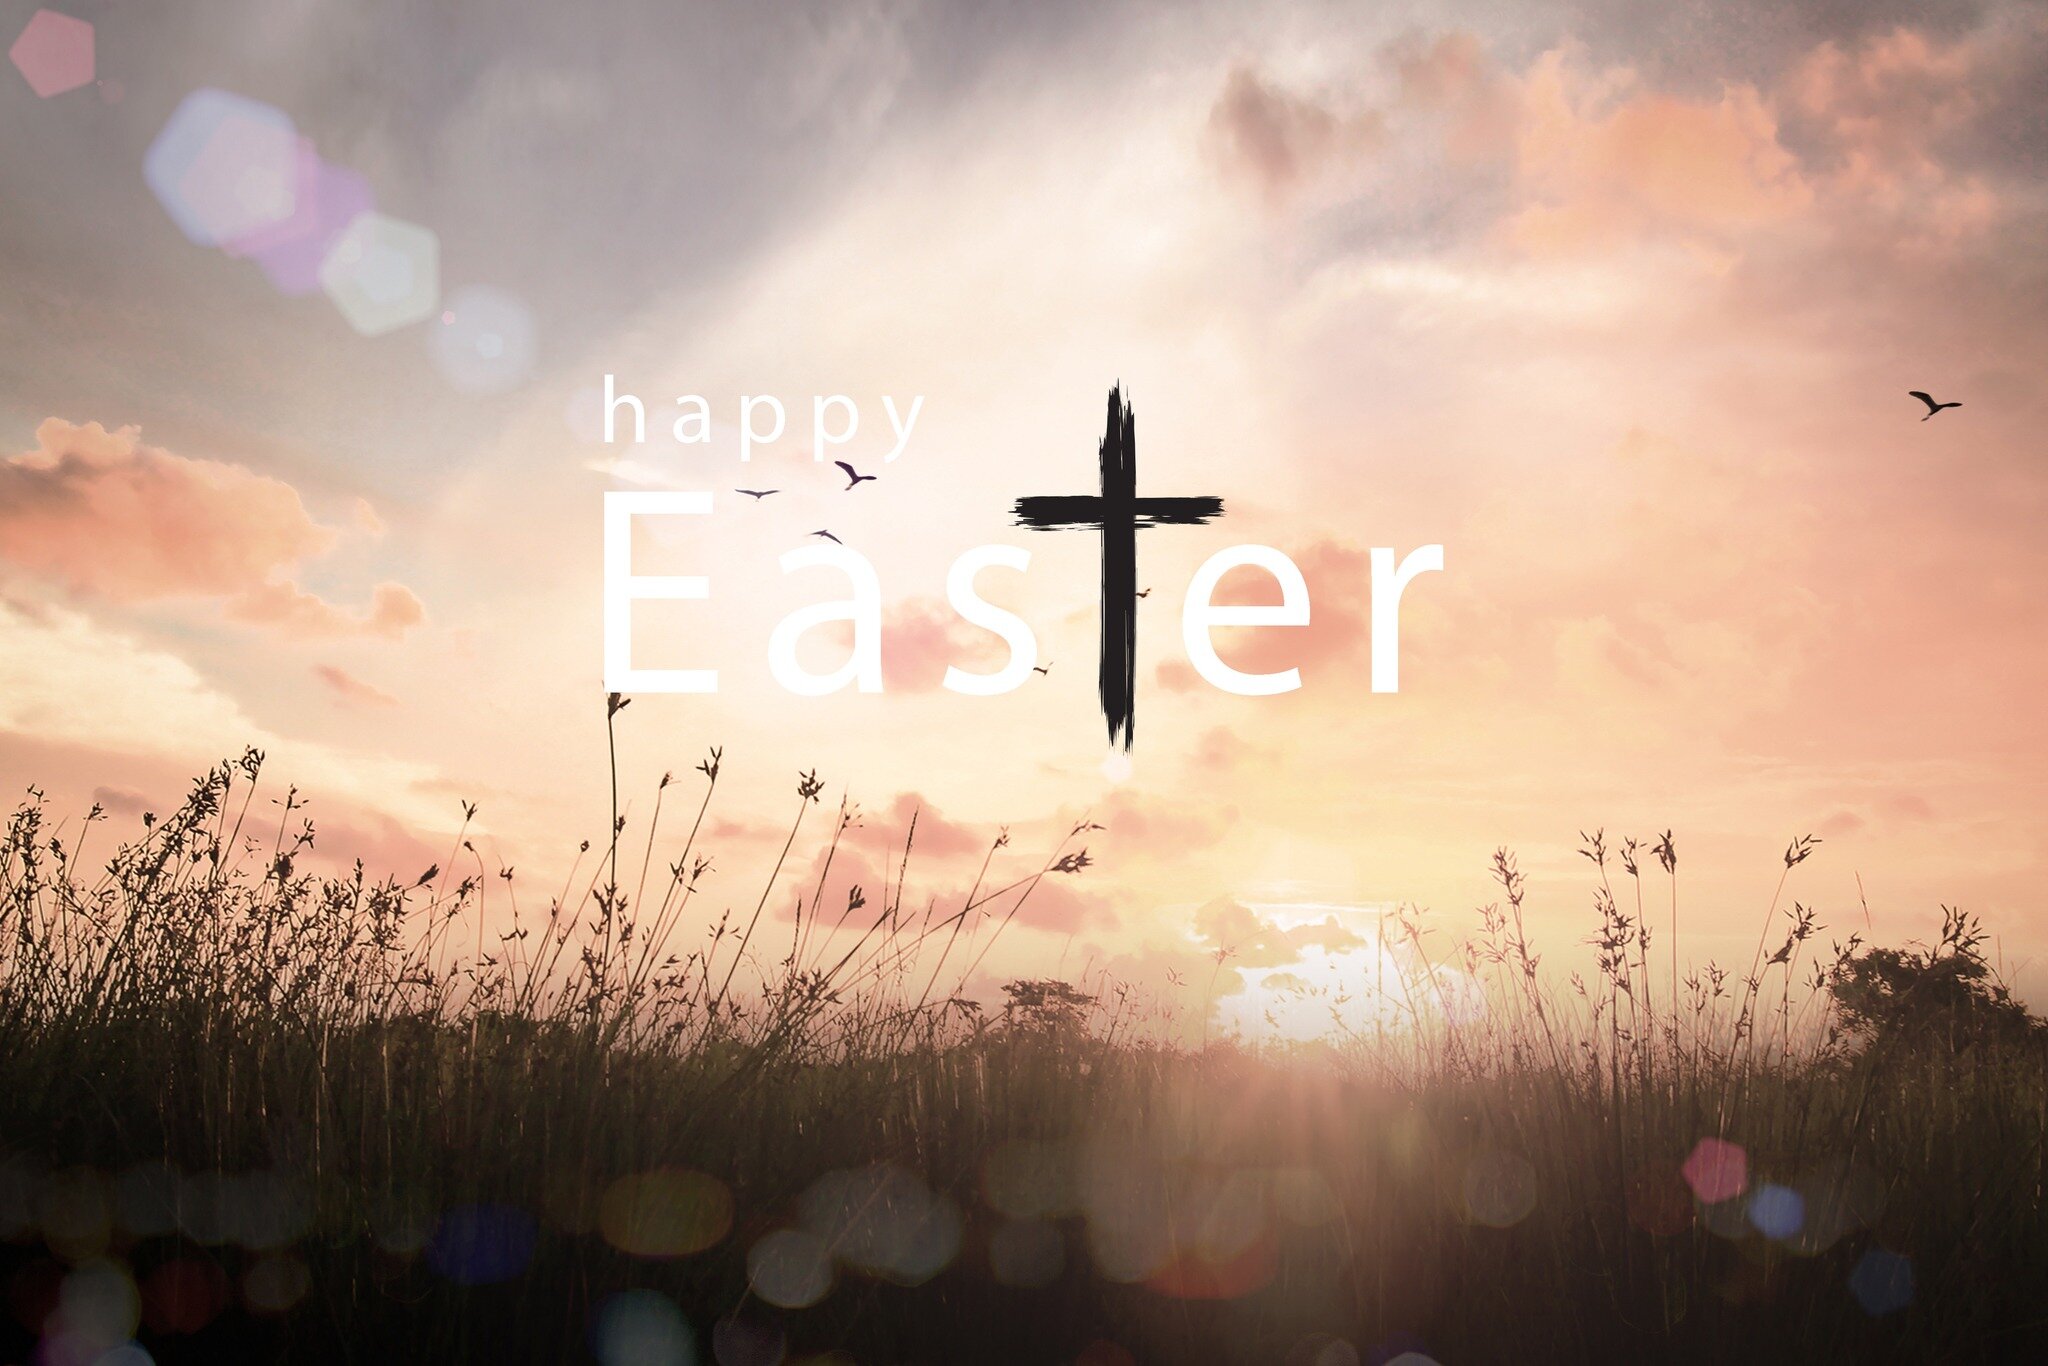 Wishing you a Blessed Easter! 

Therefore, if anyone is in Christ, he is a new creation. The old has passed away; behold, the new has come. 2 Corinthians 5:17